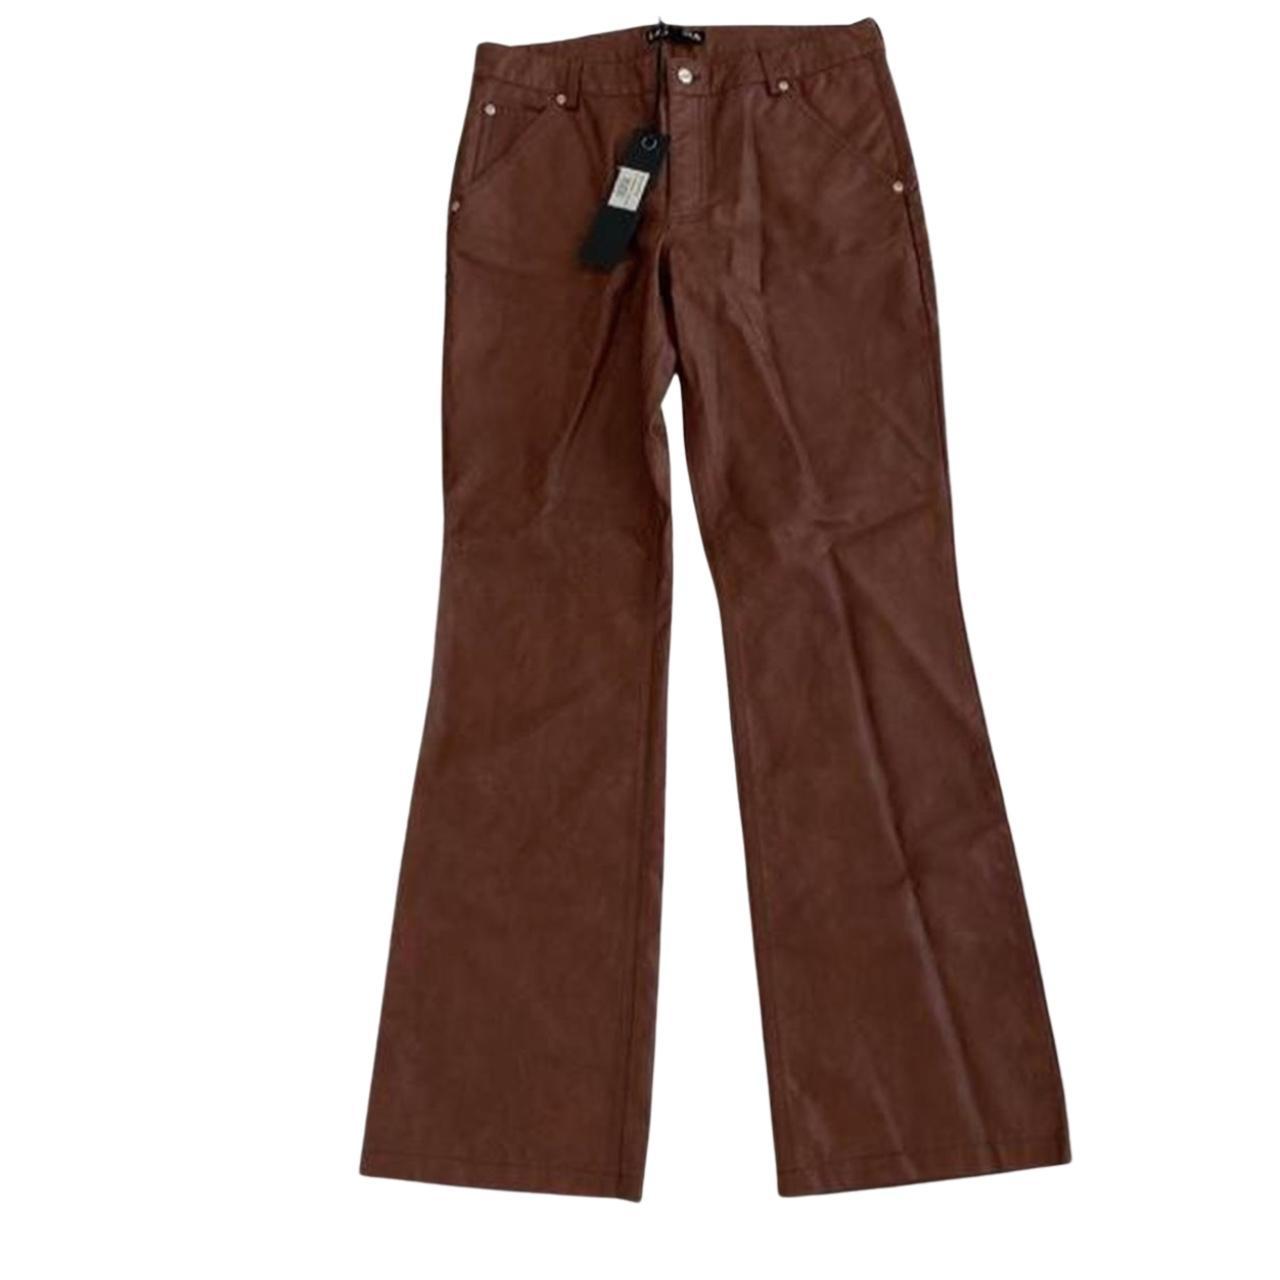 Product Image 1 - I.AM.GIA brown leather looking pants
Size: